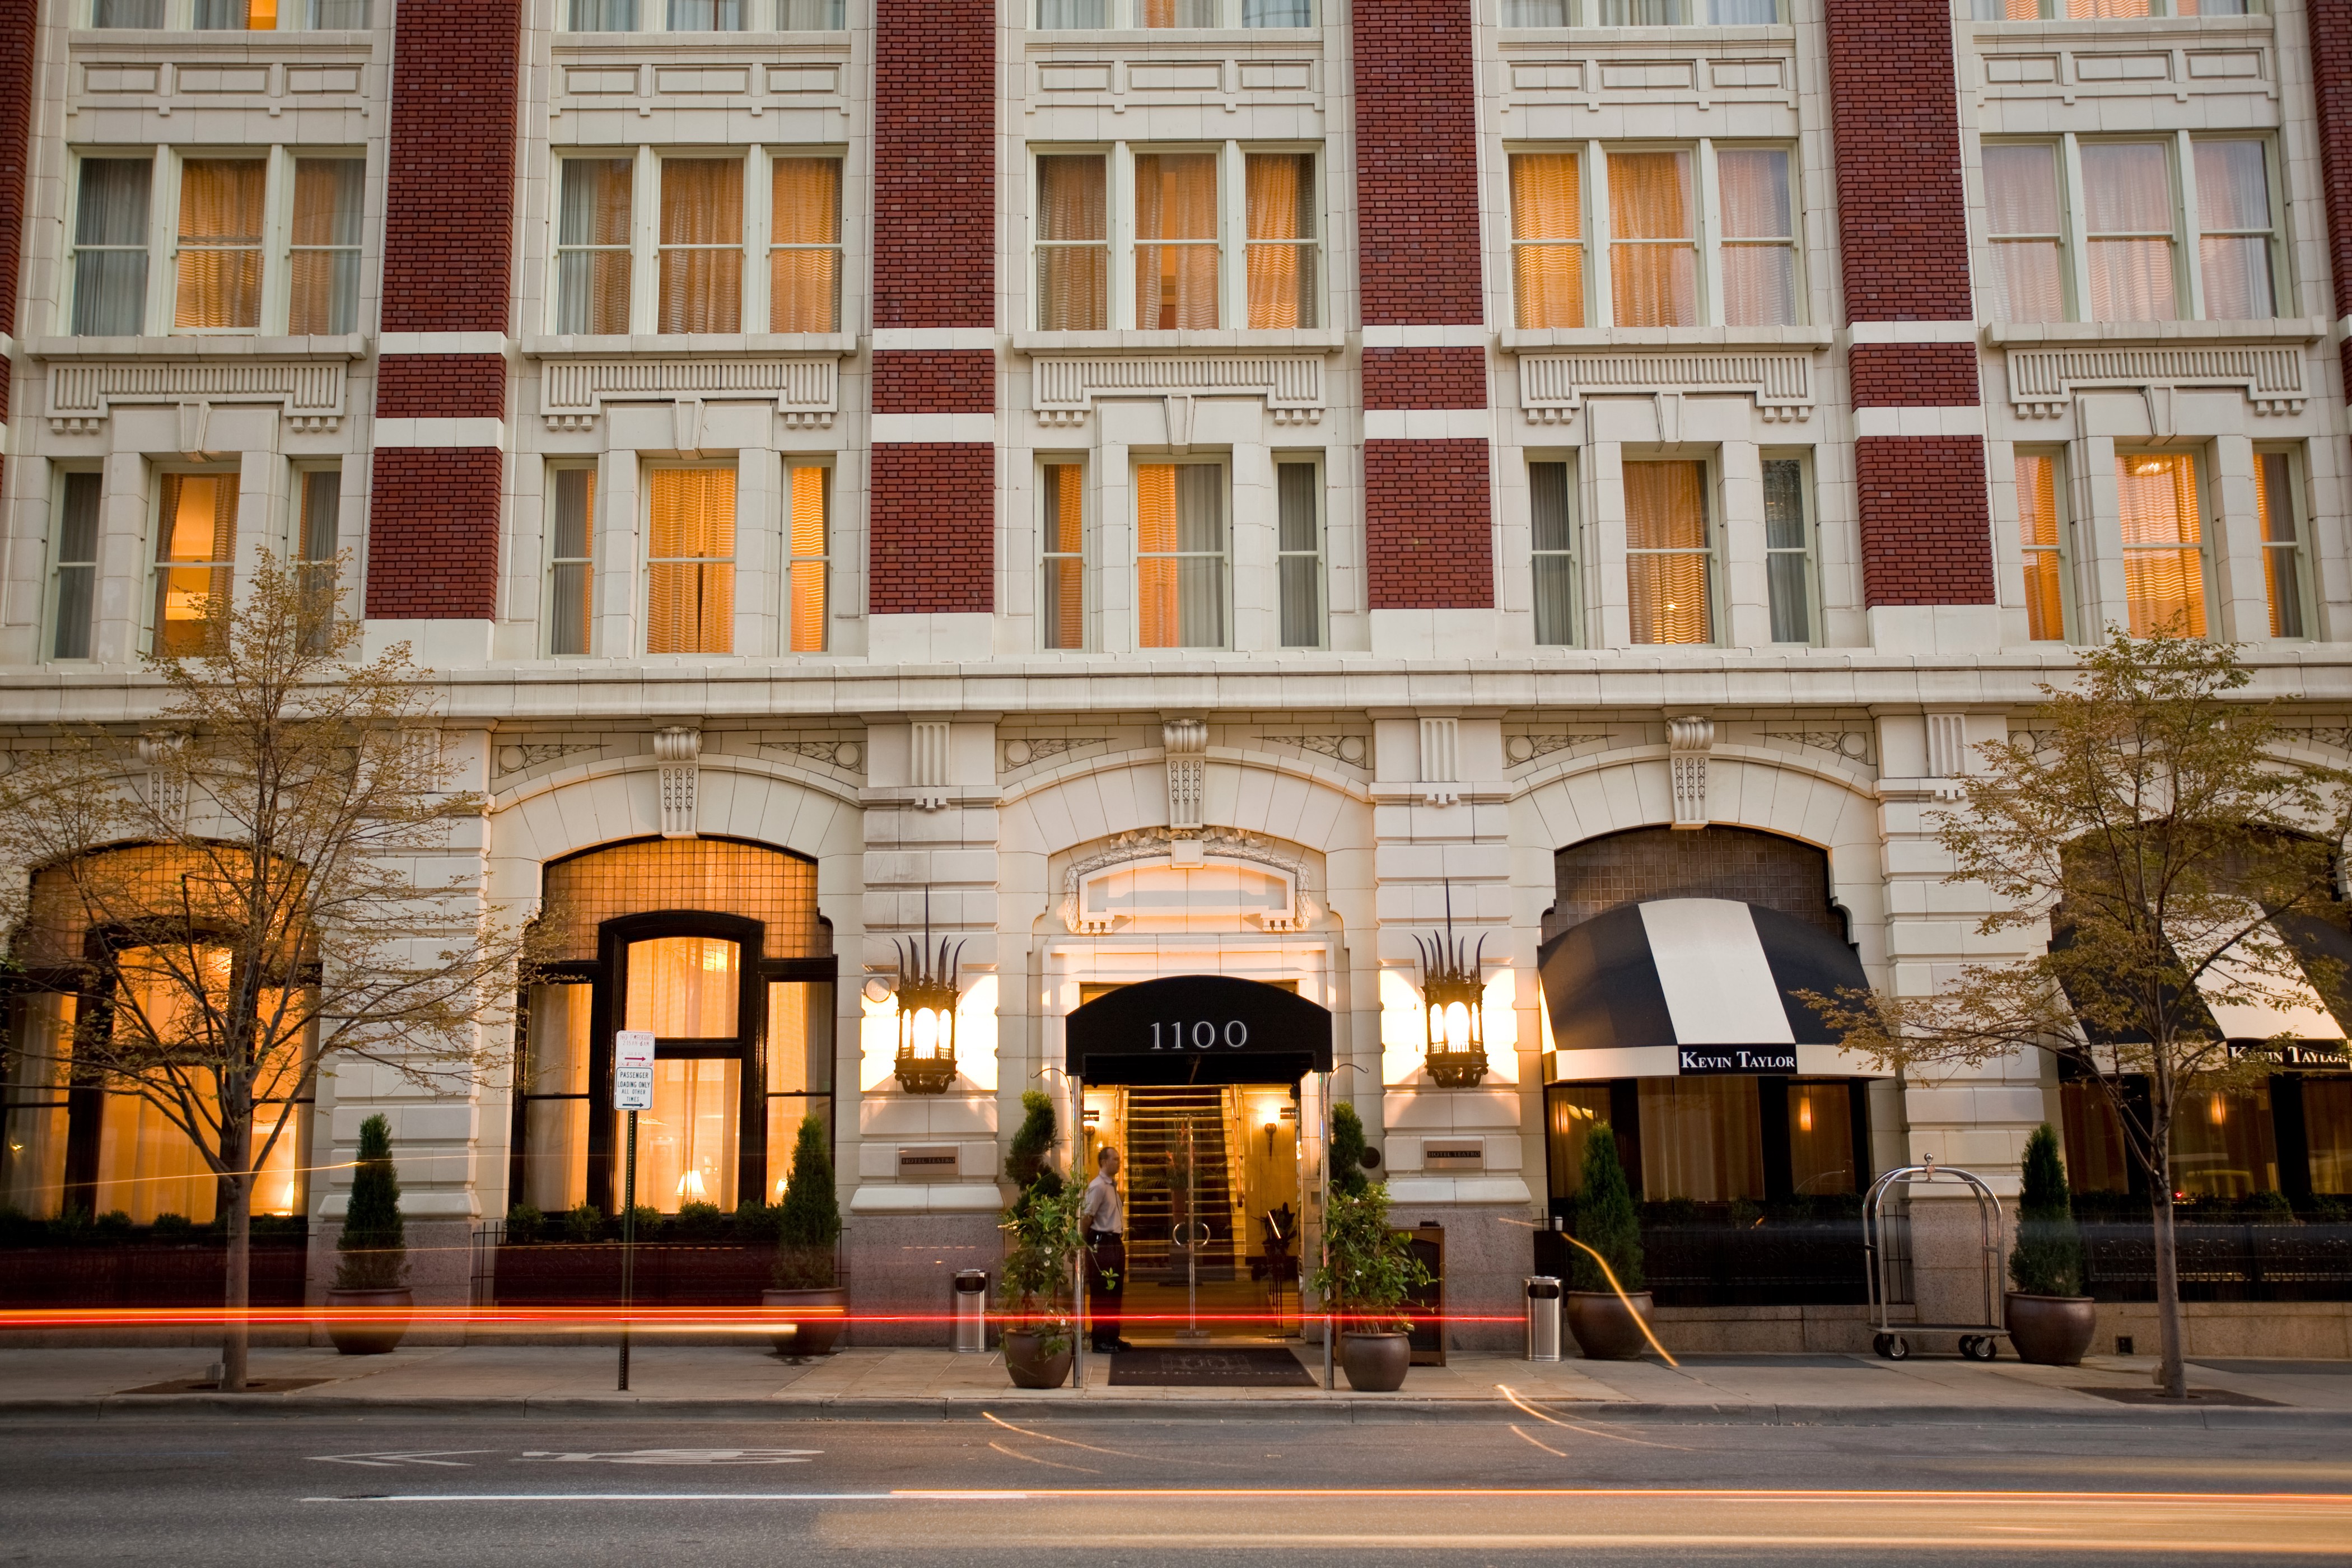 Hotel Teatro - an ideally located, boutique Denver Hotel.